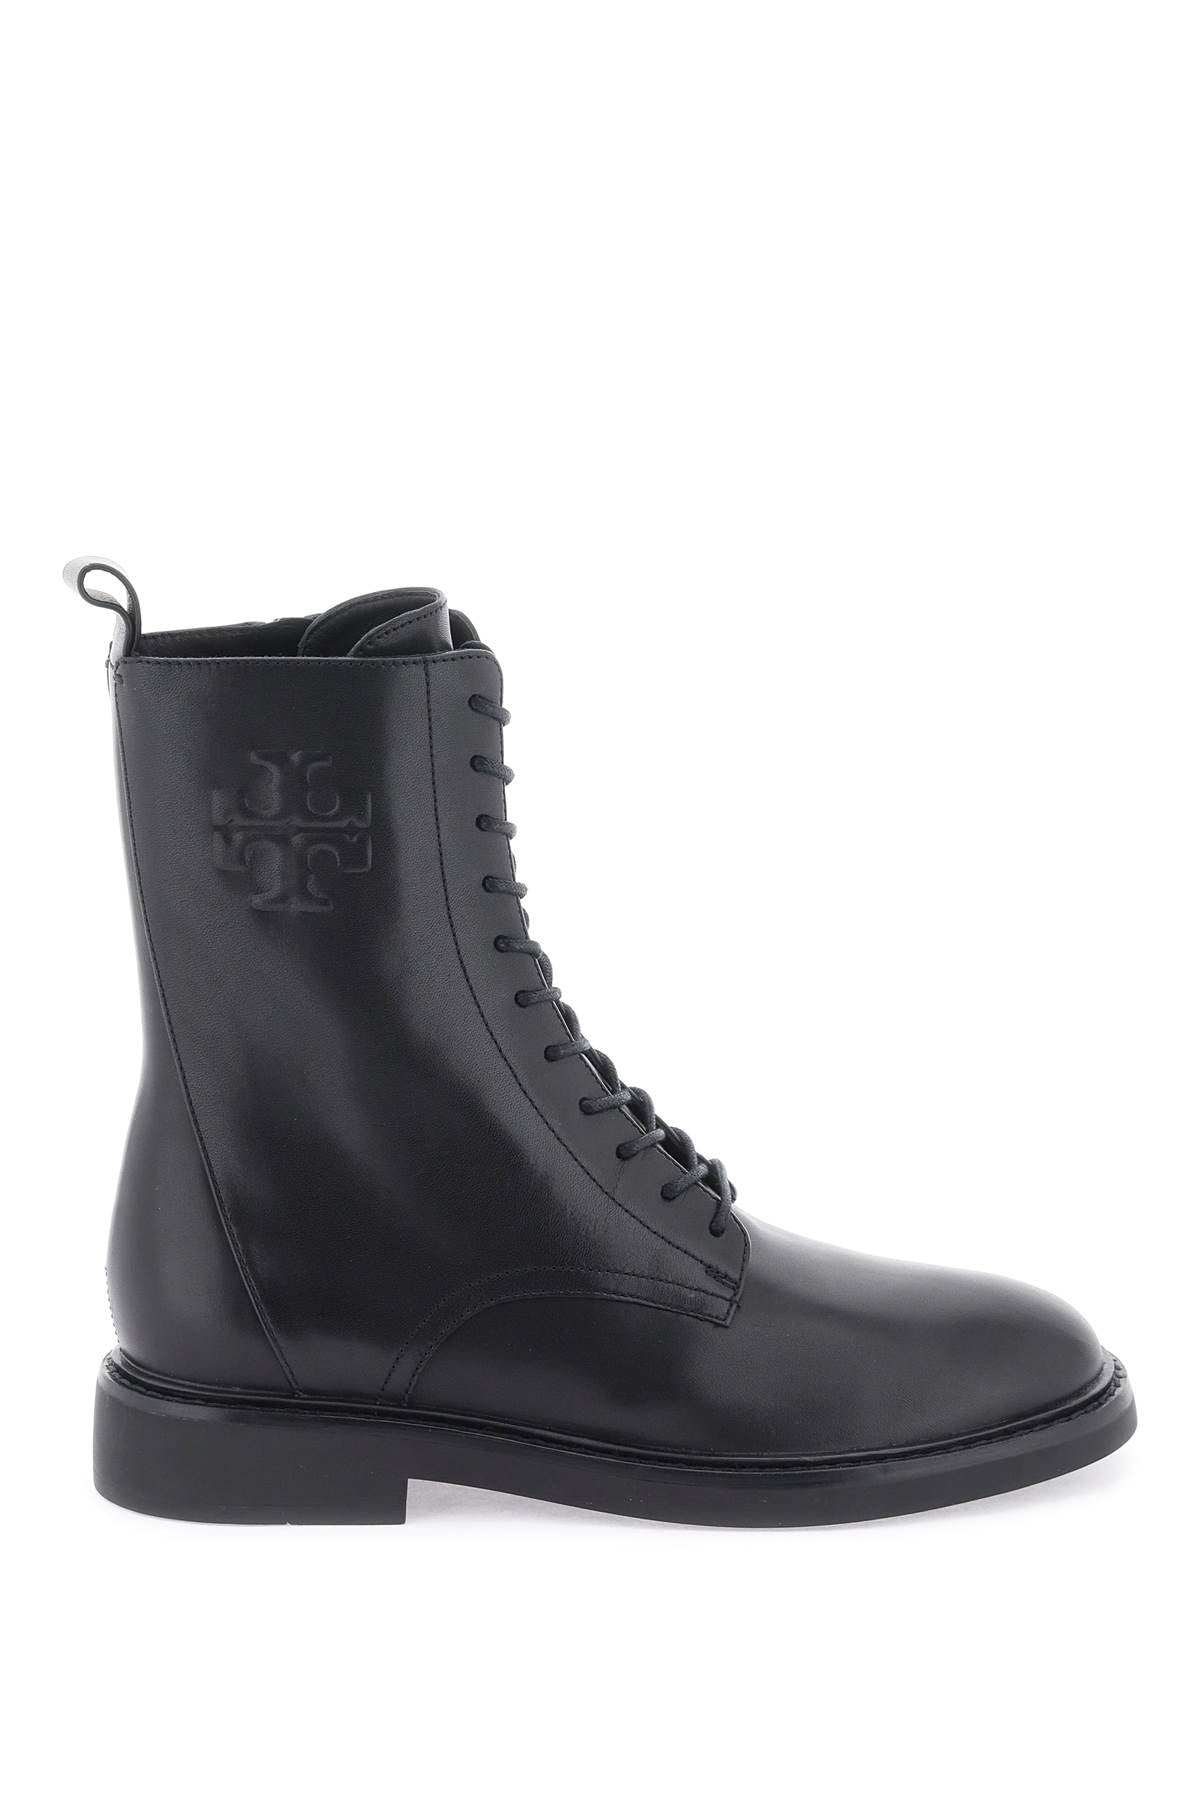 Tory burch double t combat boots-0